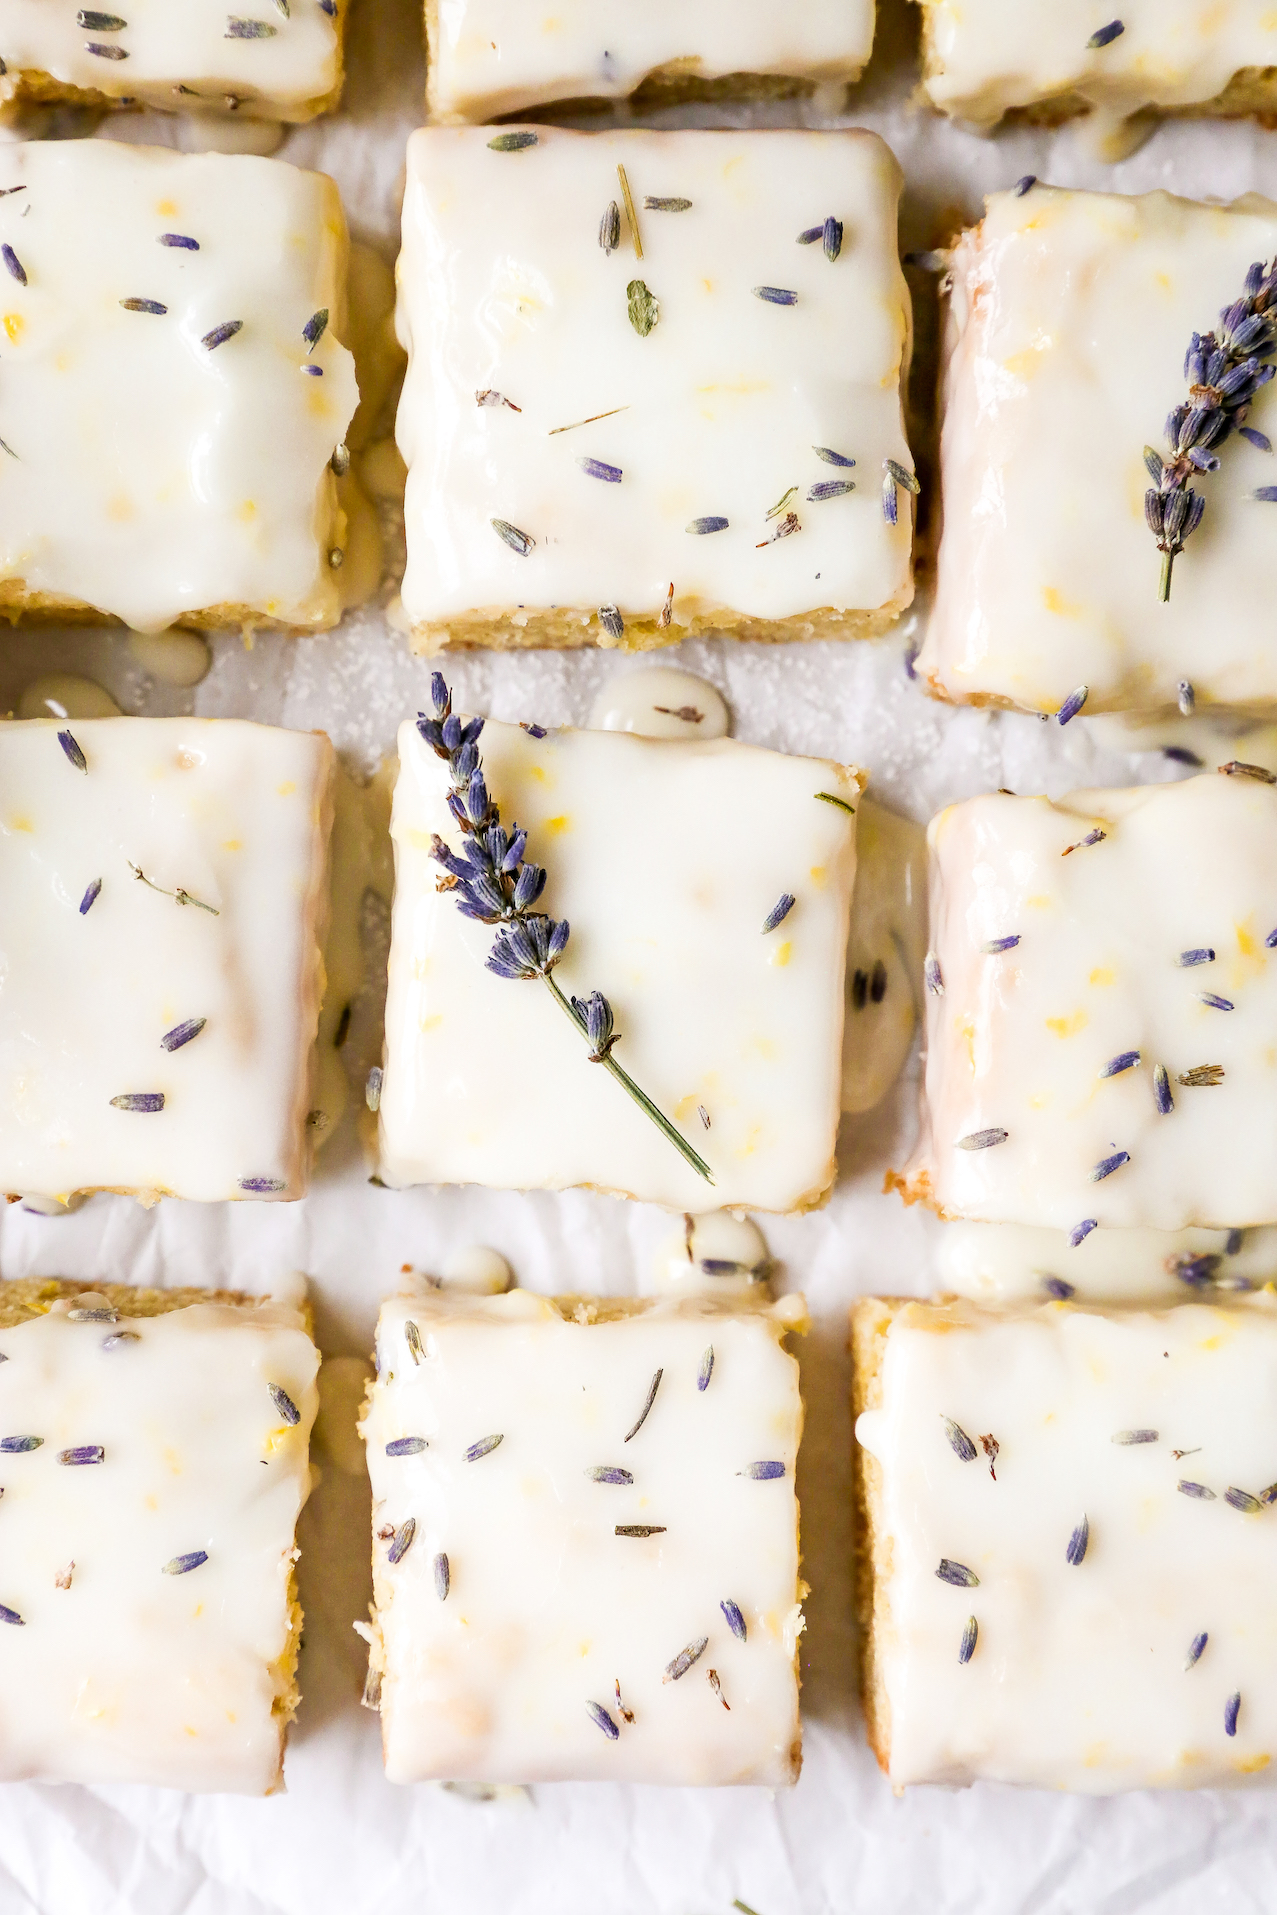 How to Cook With Lavender So Your Food Doesn't Taste Like Soap